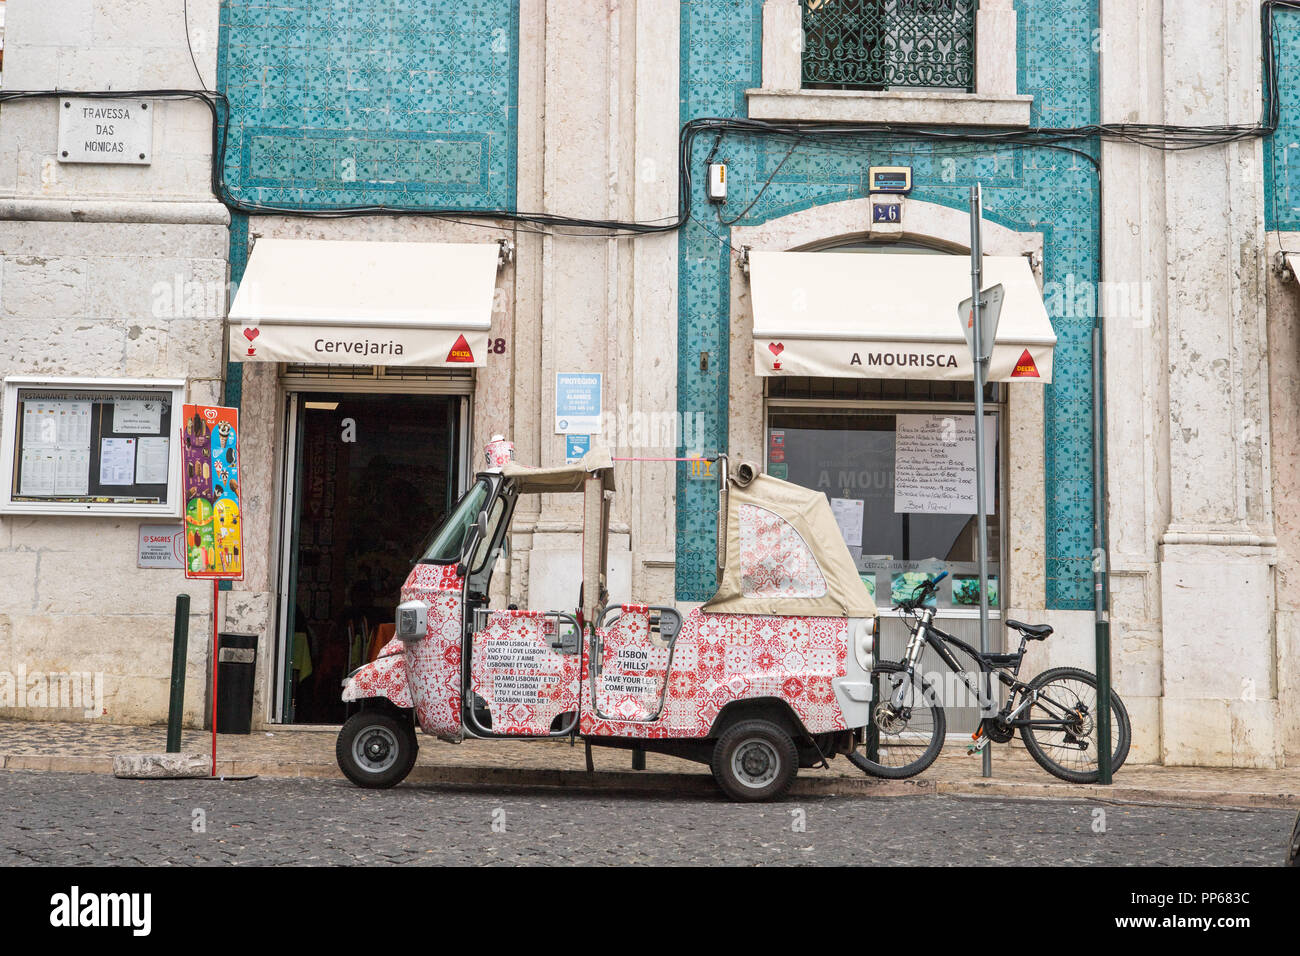 Lisbon, Portugal, TukTuk taxi parked in front of edifice. Stock Photo